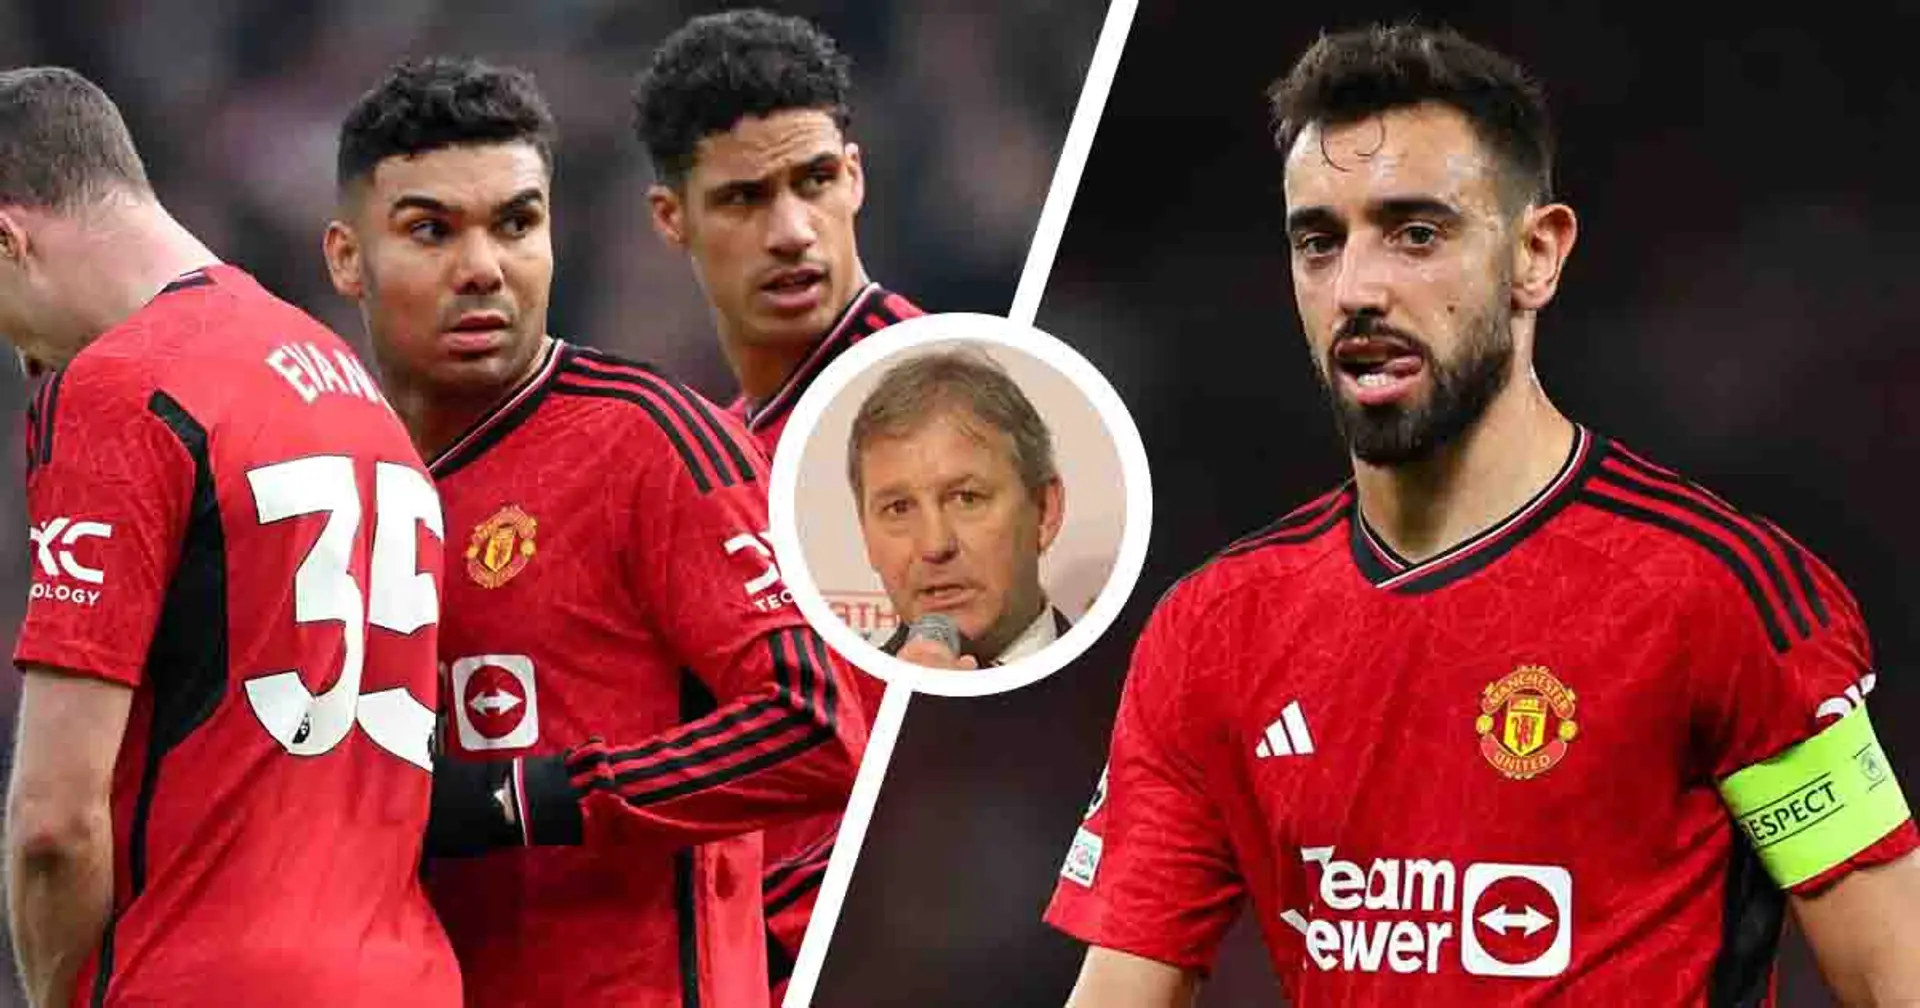 Bryan Robson names two Man United players better suited for captaincy role over Bruno Fernandes